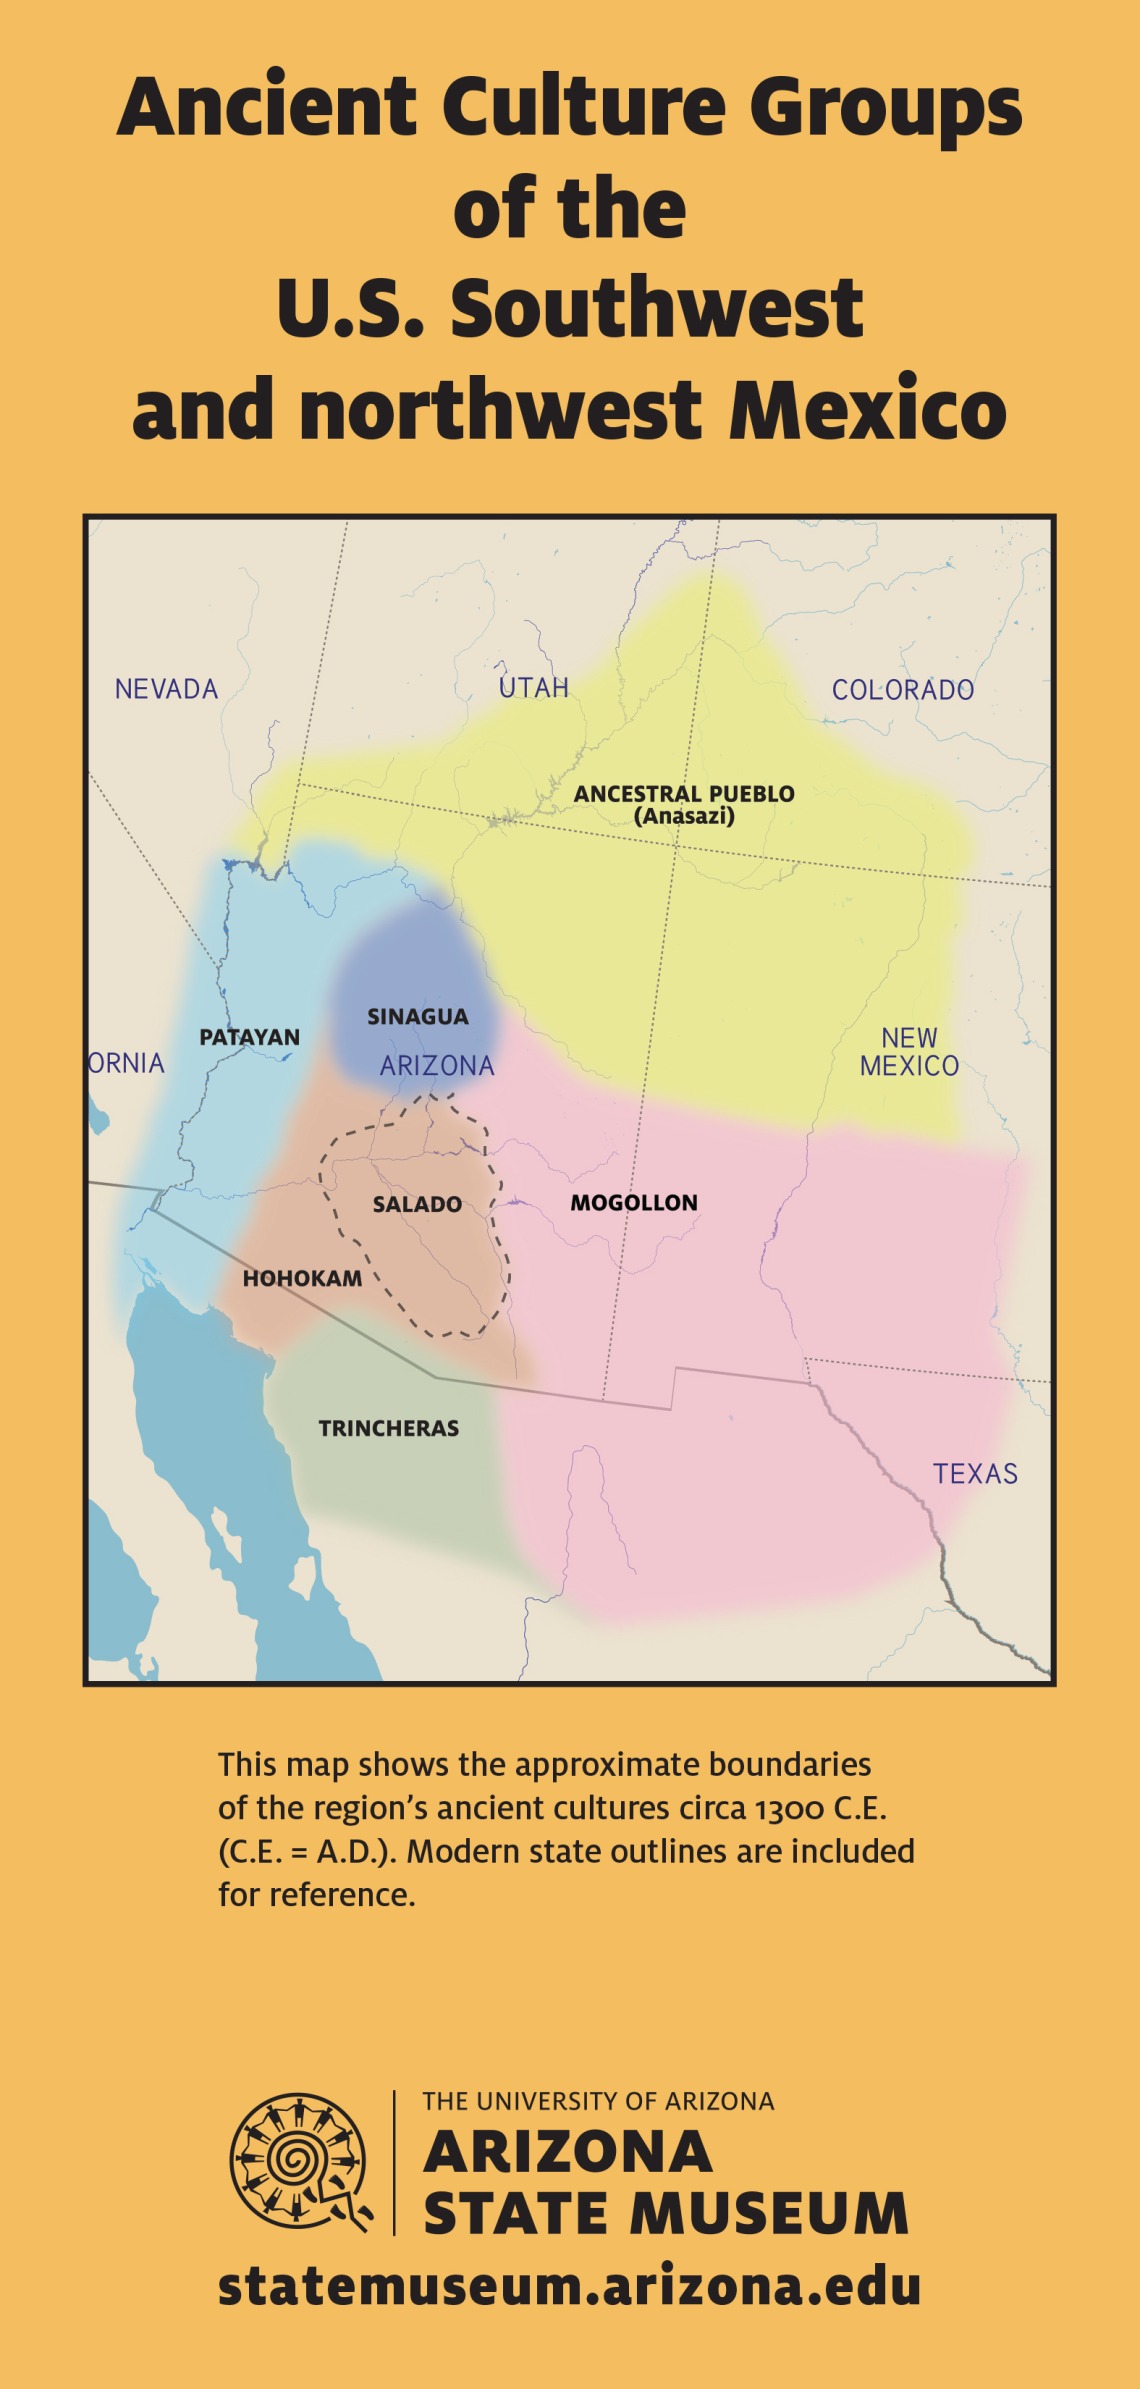 This map shows the approximate boundaries  of the region’s ancient cultures circa 1300 C.E. (C.E. = A.D.).